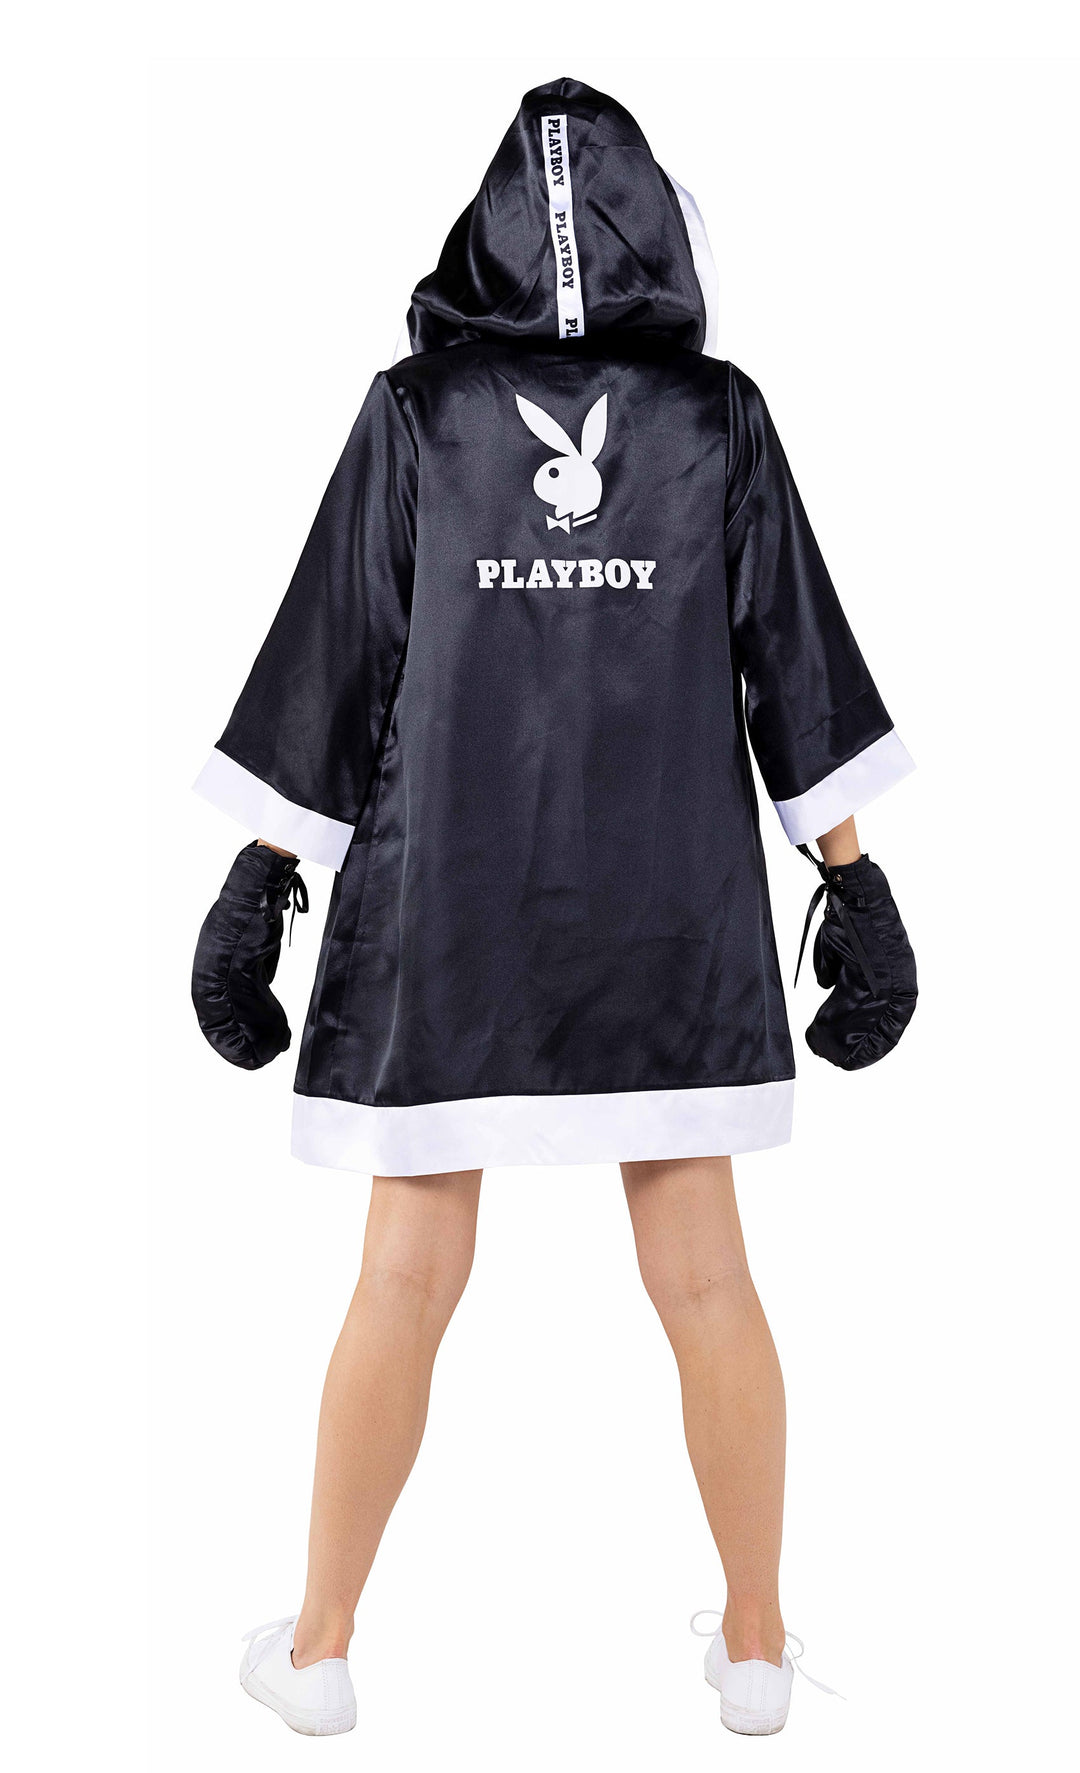 Playboy Knock-Out Boxer Women's Costume